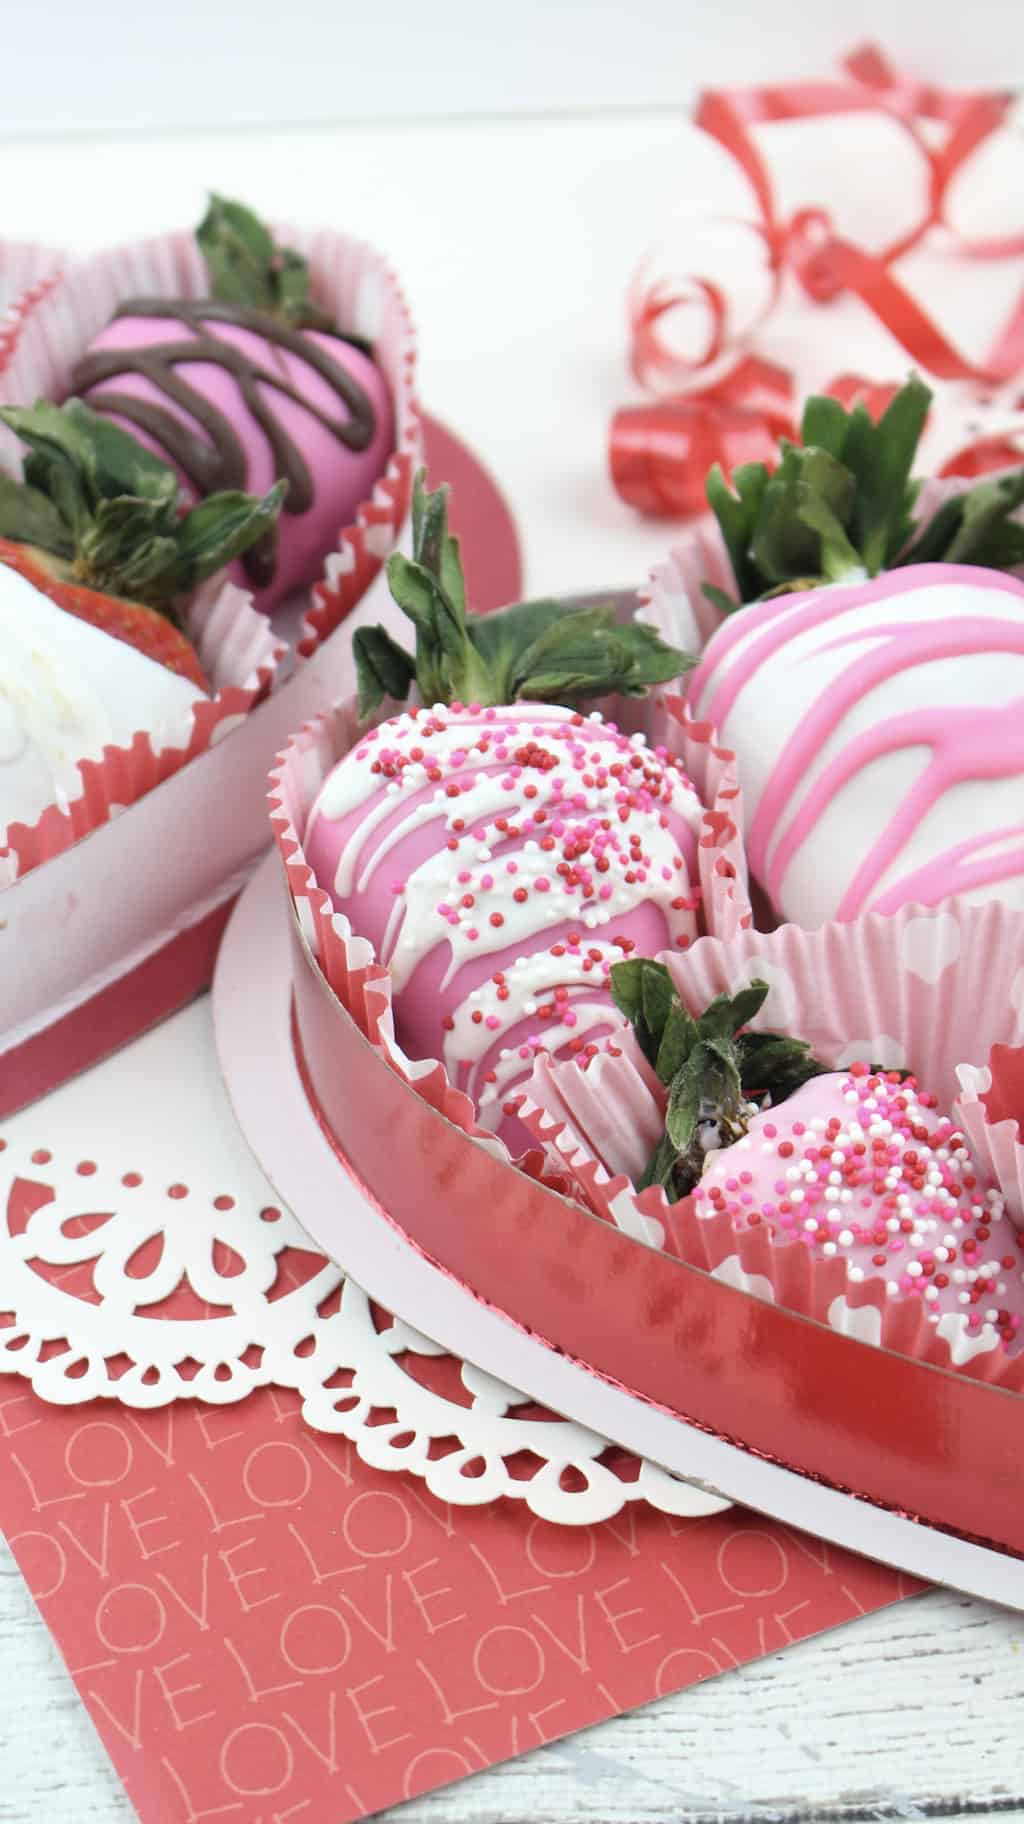 Valentine Chocolate Dipped Strawberries | DINE DREAM DISCOVER